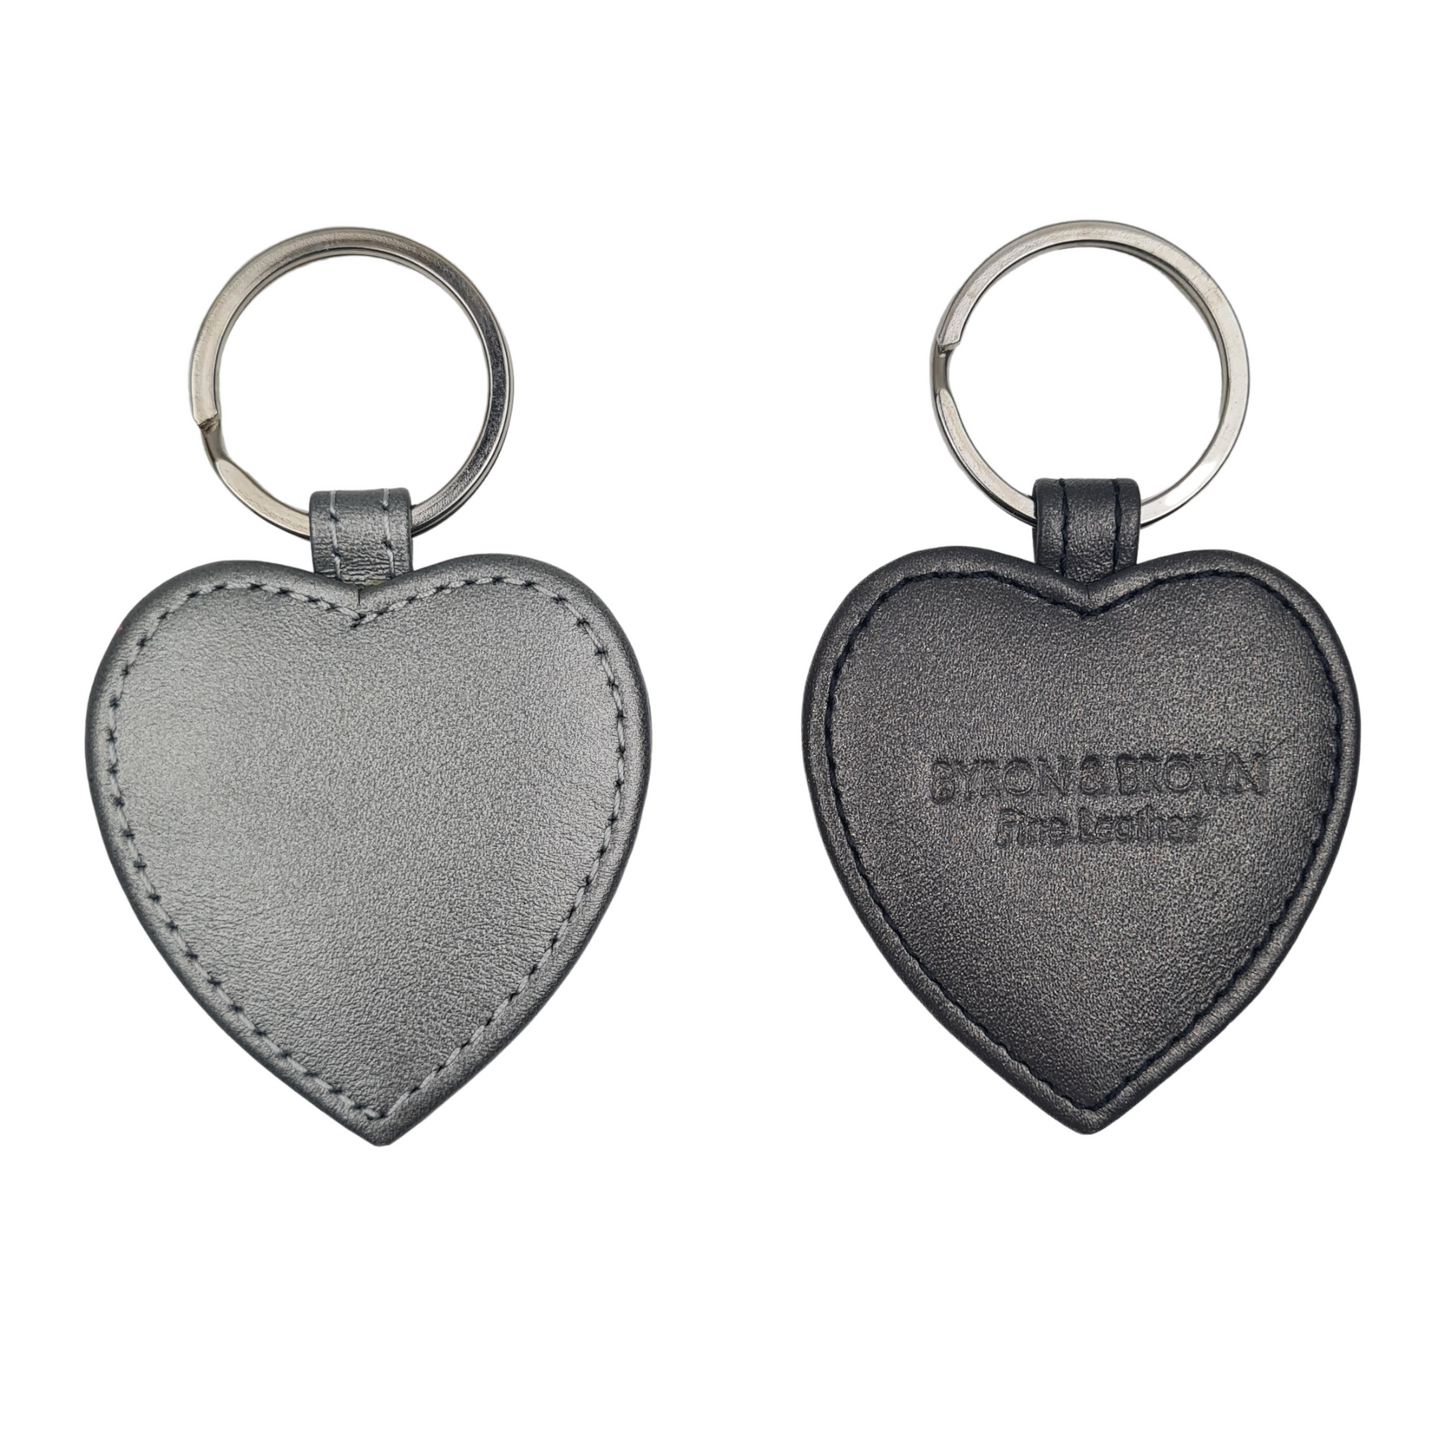 Smooth Nappa Leather Heart Key Ring